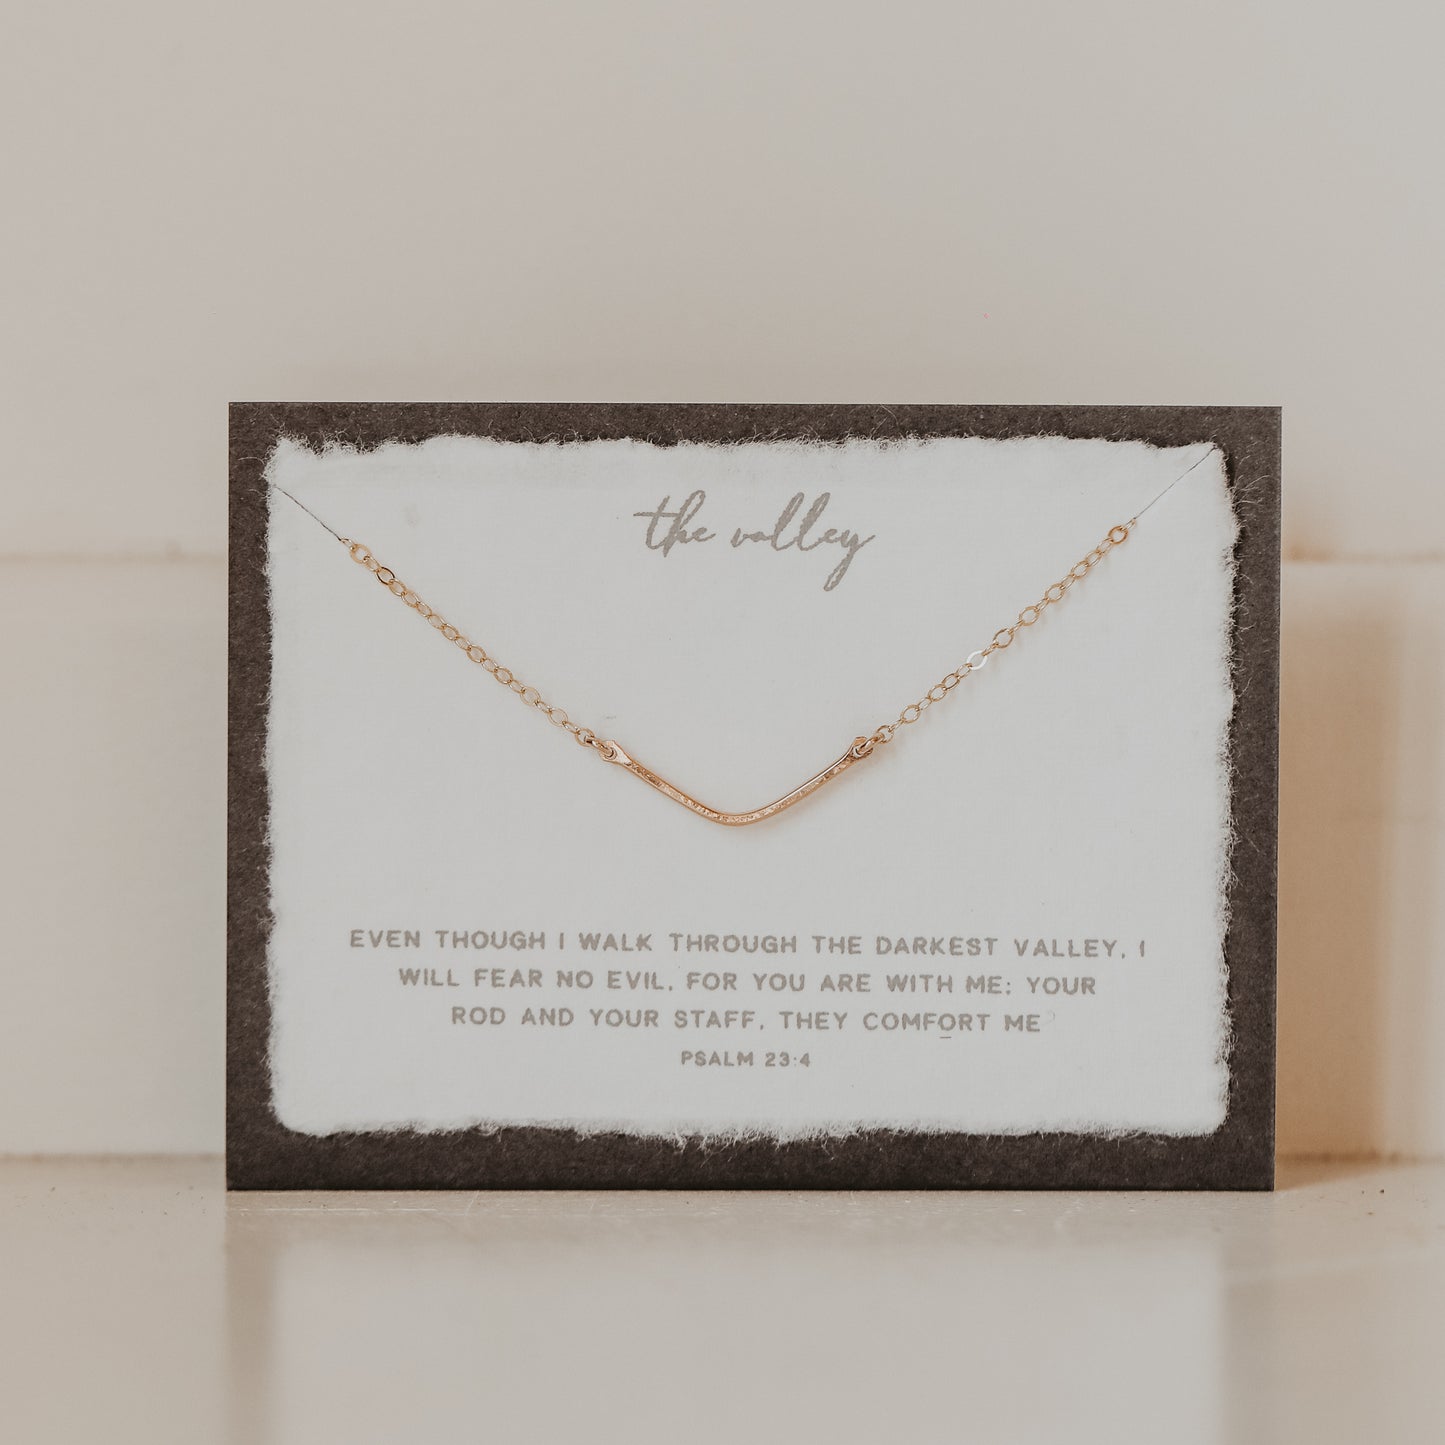 The Mini Valley Necklace